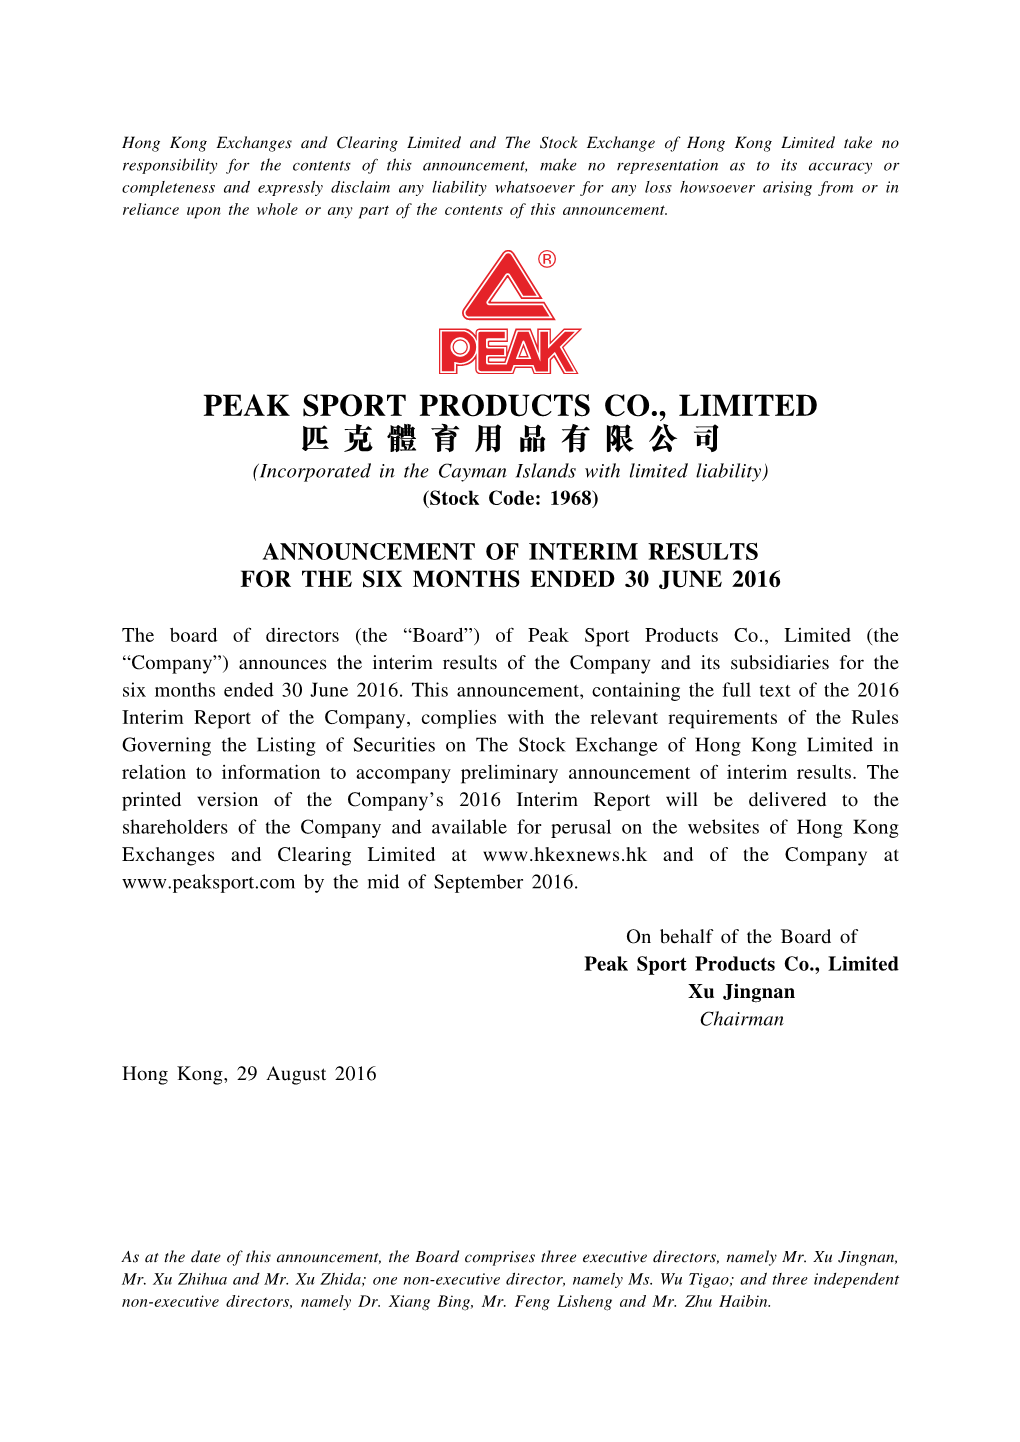 PEAK SPORT PRODUCTS CO., LIMITED 匹 克 體 育 用 品 有 限 公 司 (Incorporated in the Cayman Islands with Limited Liability) (Stock Code: 1968)